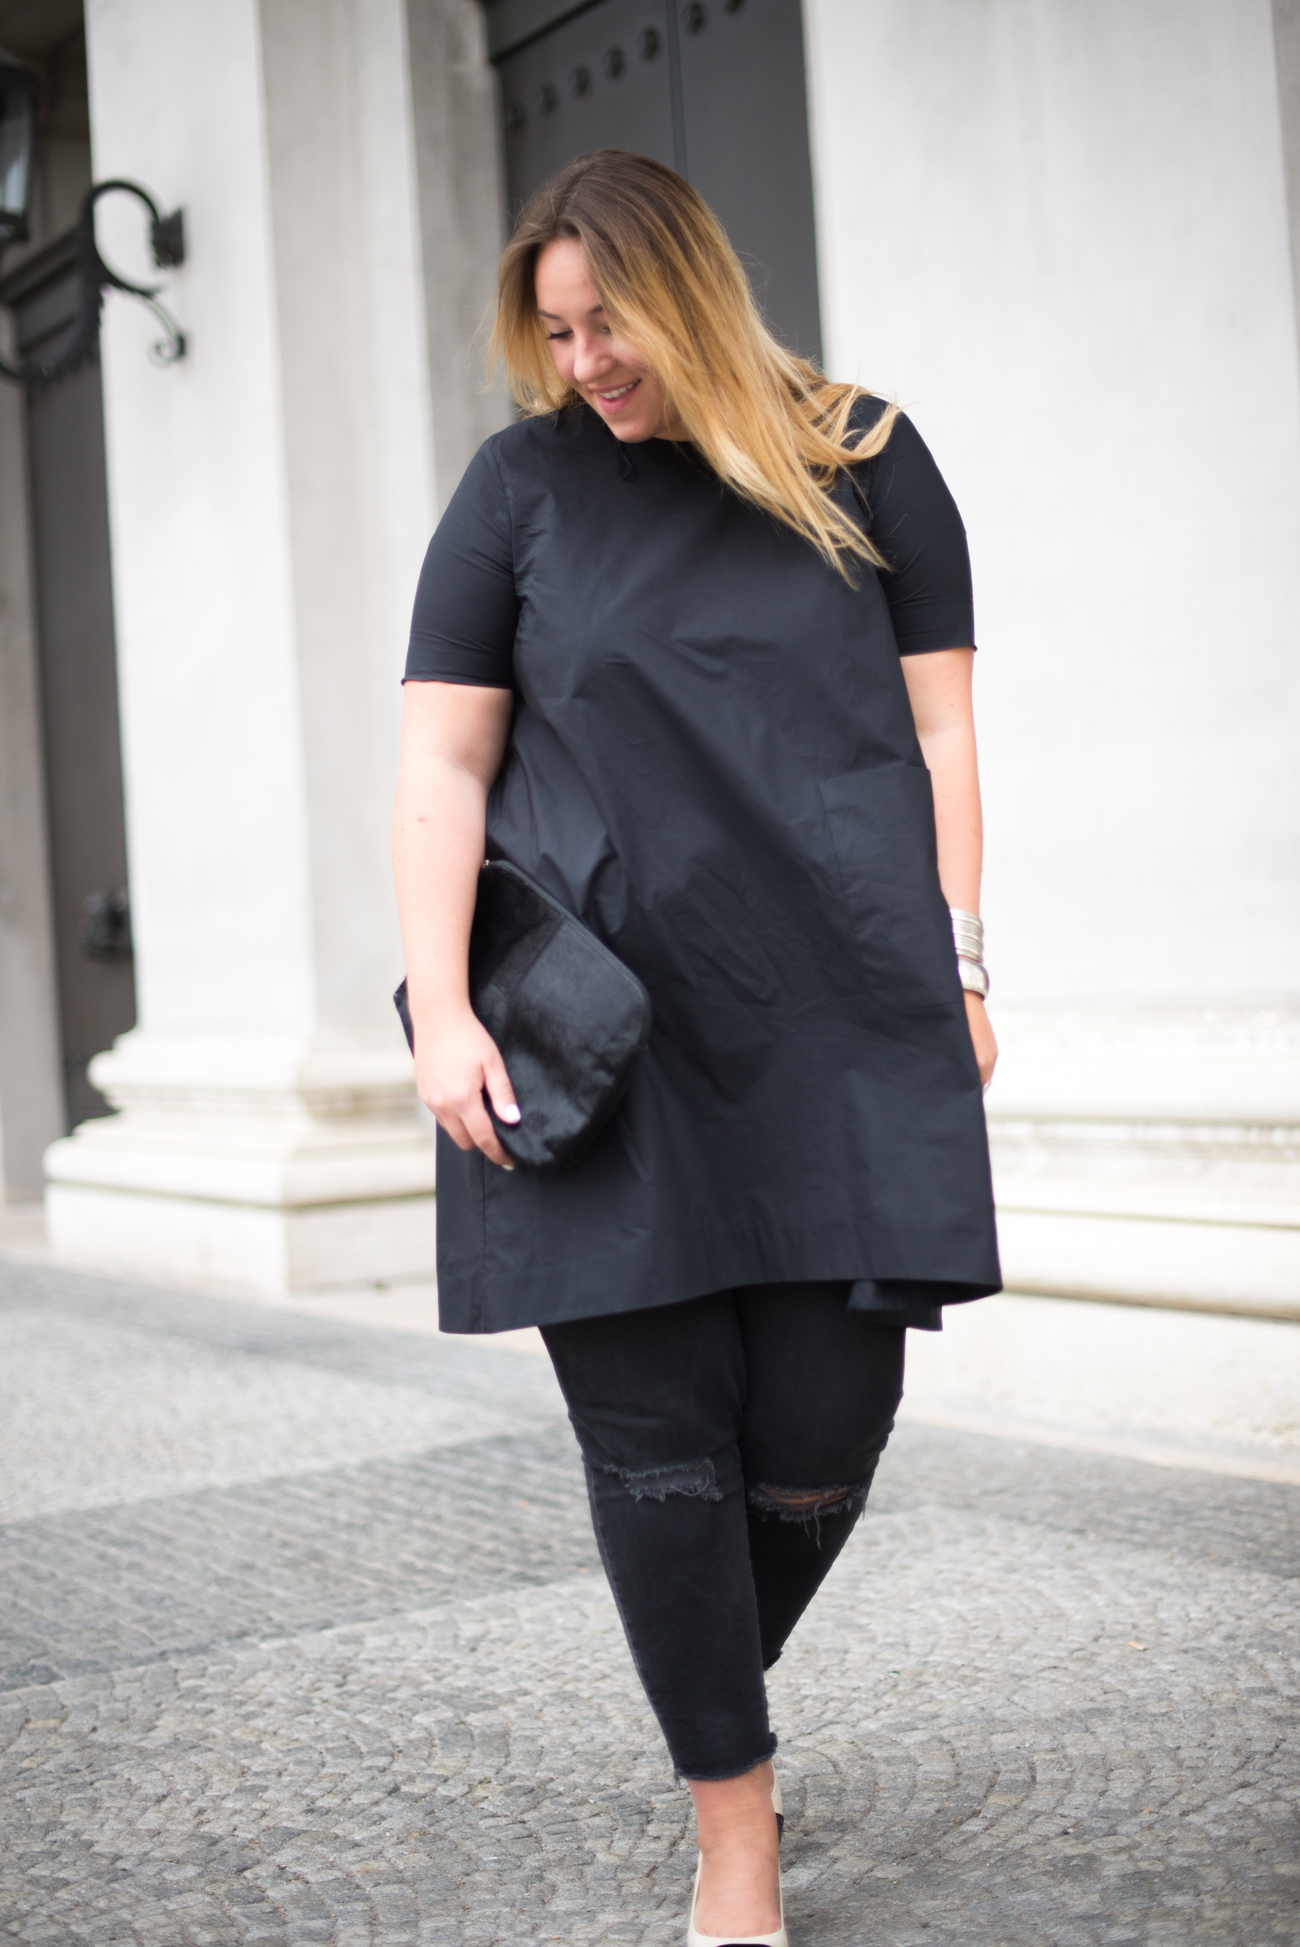 The Skinny and the Curvy One_Dress over Pants_Plussize Blogger_Plussize Fashion_Sling Back Pumps_Chanel Look a like (3 von 5)